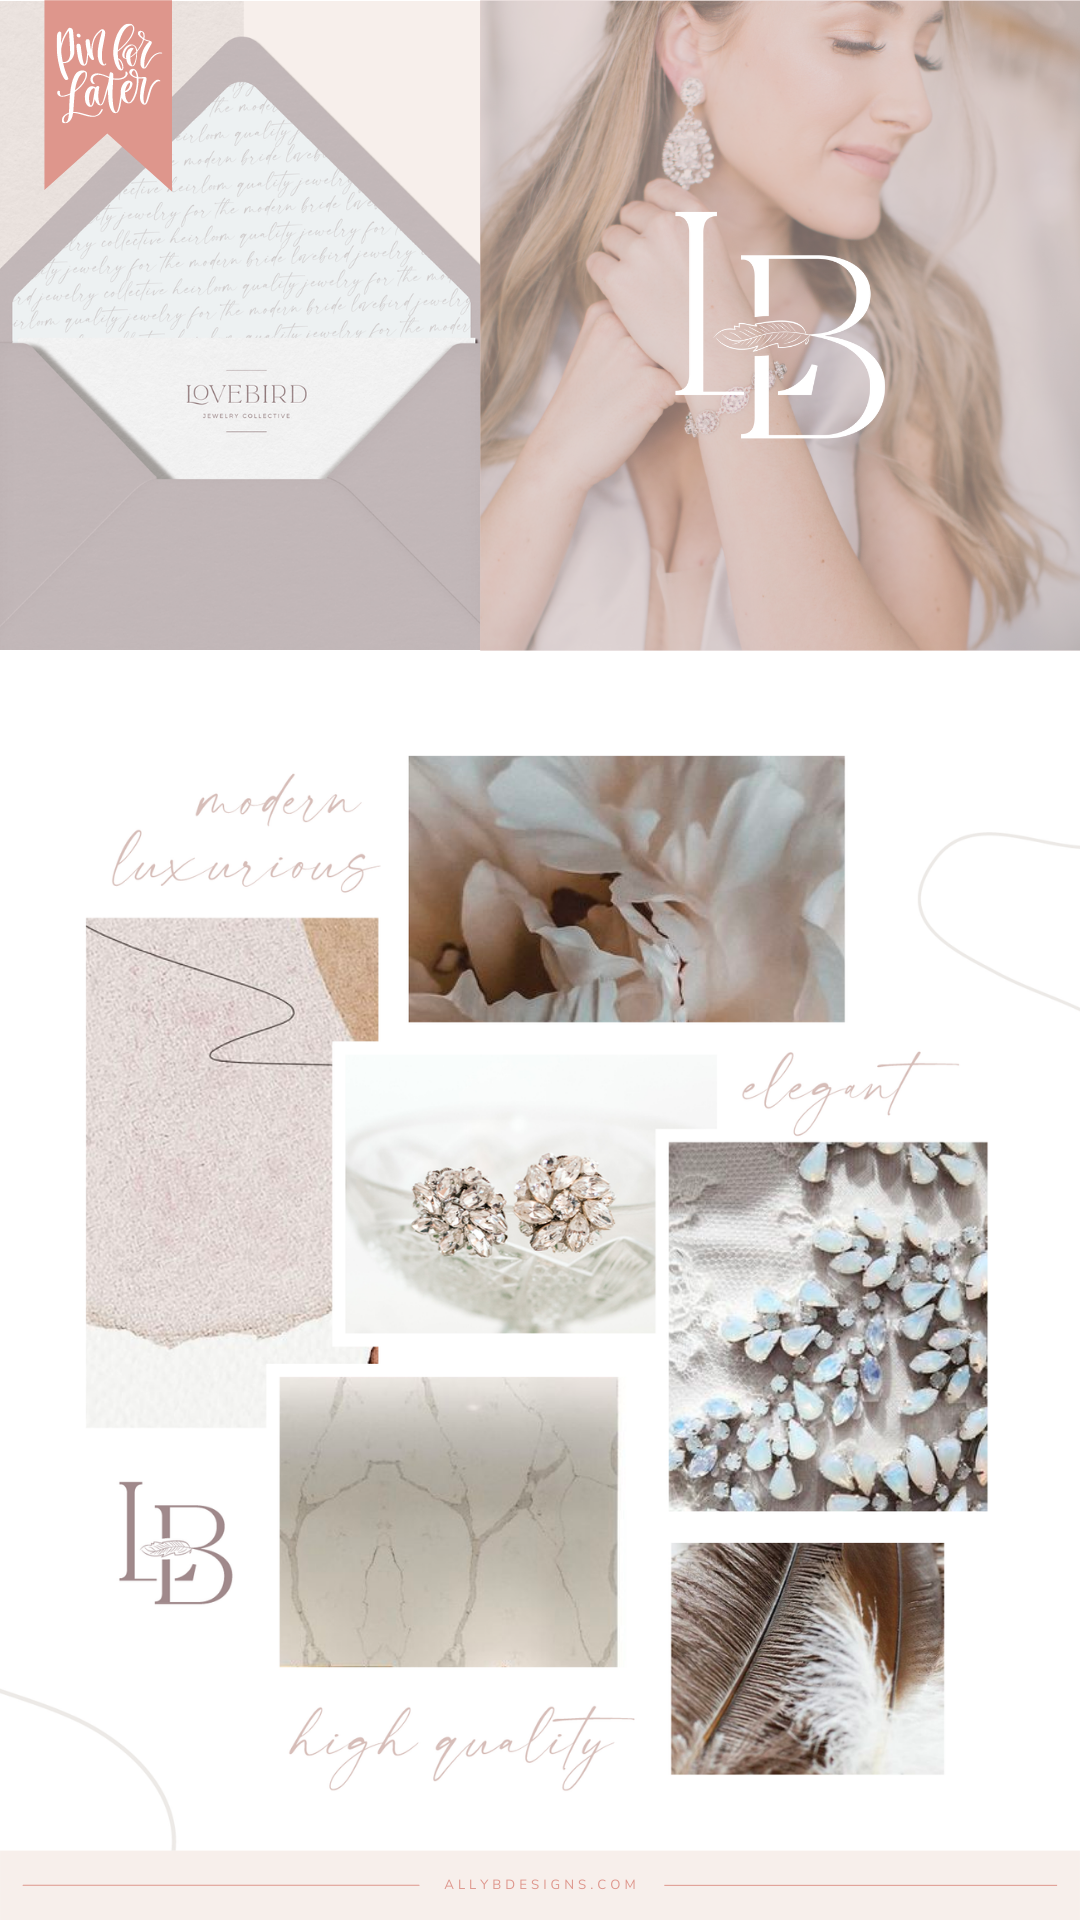 Lovebird Bridal Jewelry brand collateral by Ally B Designs